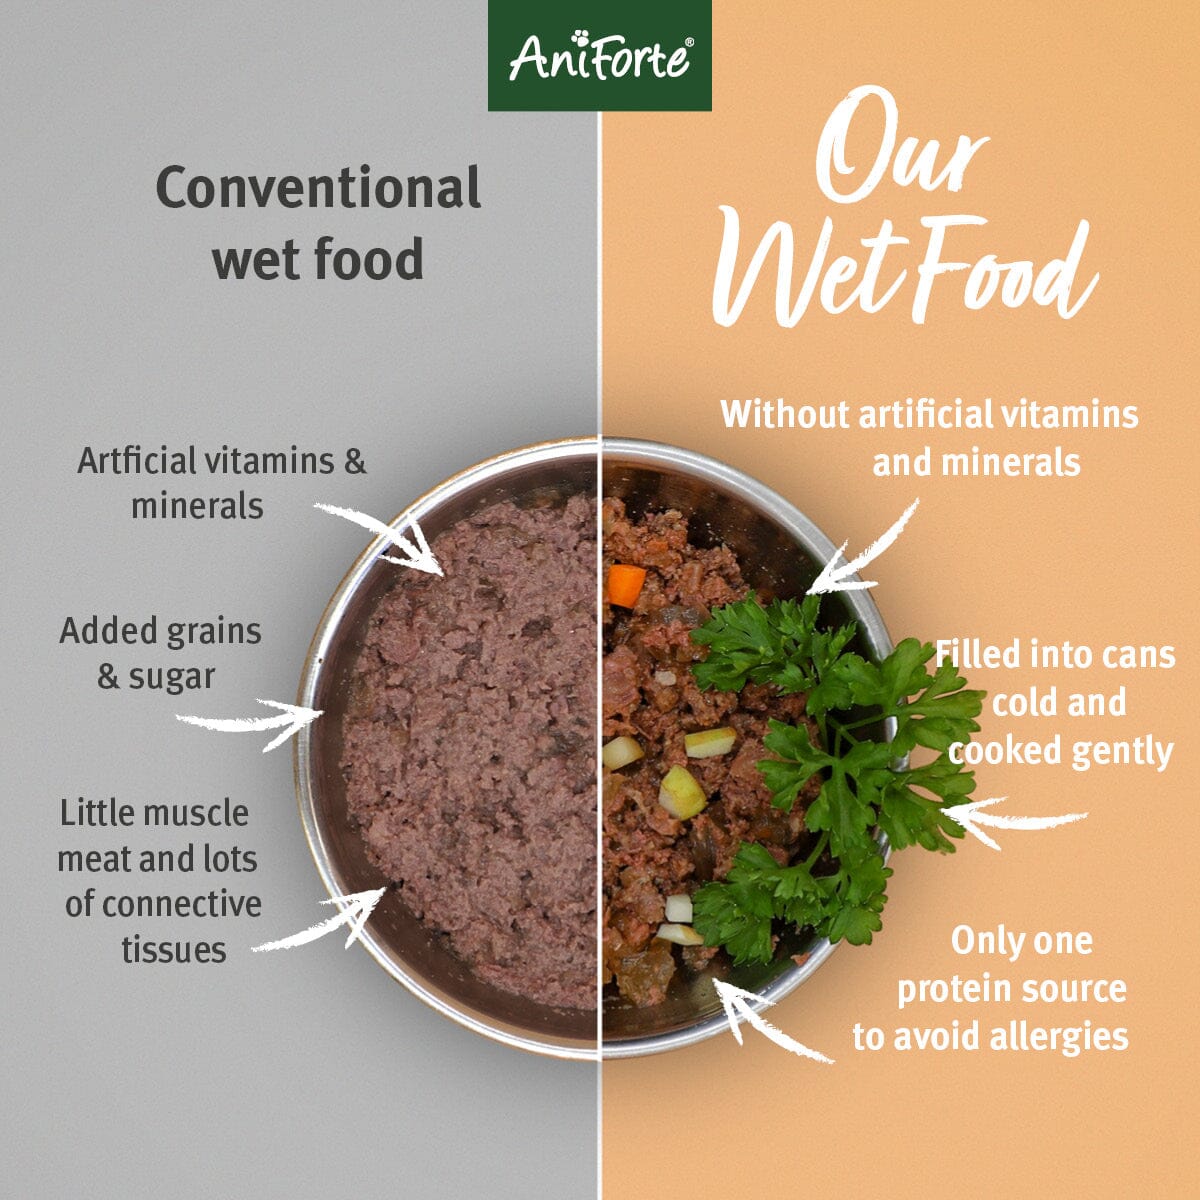 PureNature Wild Forest - Wet Food for Dogs - AniForte UK